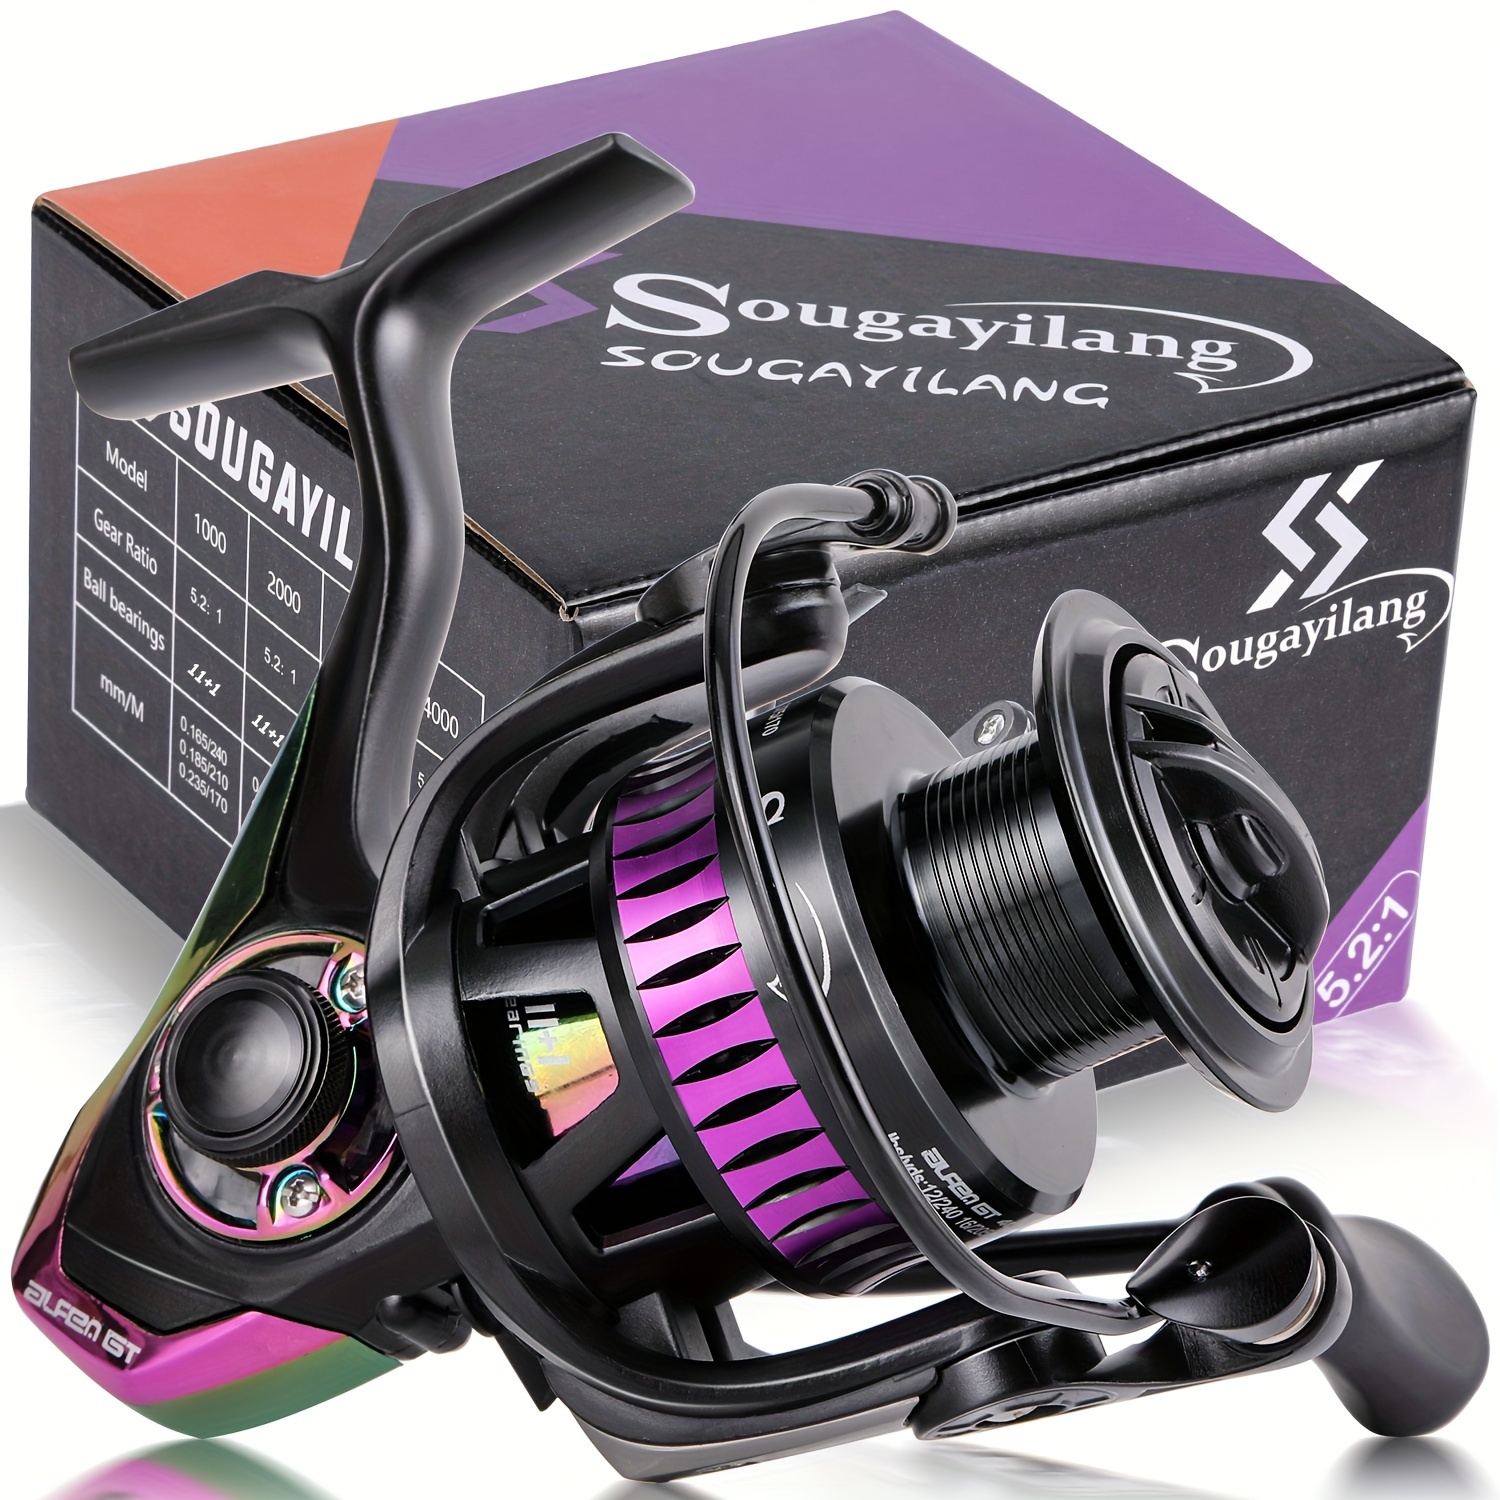 

Super Smooth Spinning Reel With 11 + 1 Bb For Freshwater, Durable And Powerful Reel With Strong Graphite Frame For Fishing Bass Spinning Fishing Reel